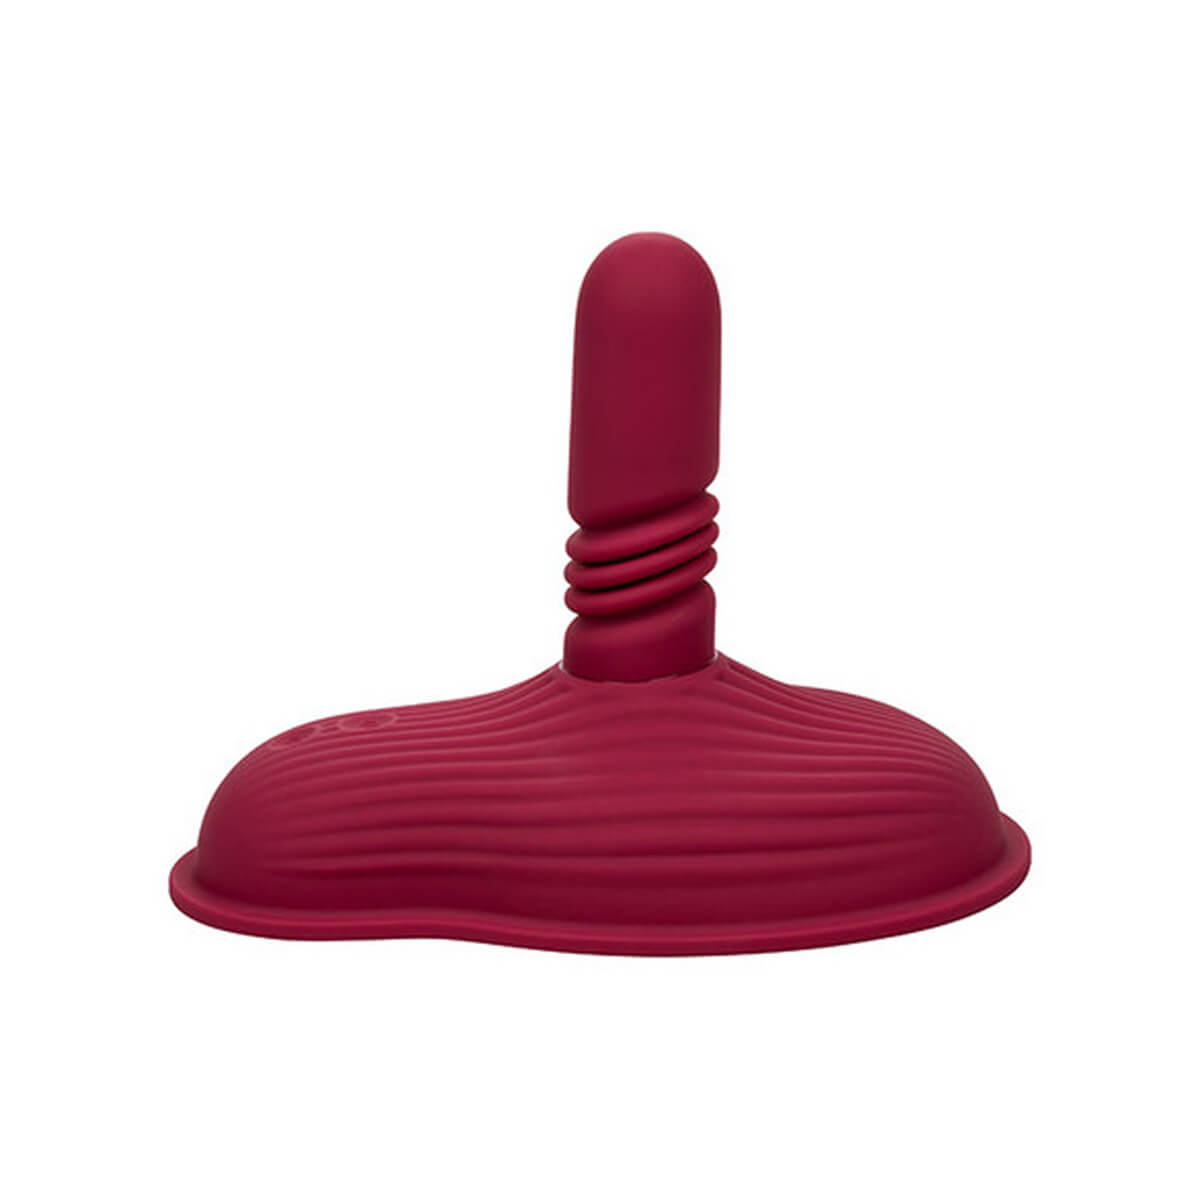 Profile view of Red silicone grinding pad with shaft for internal stimulation Nudie Co